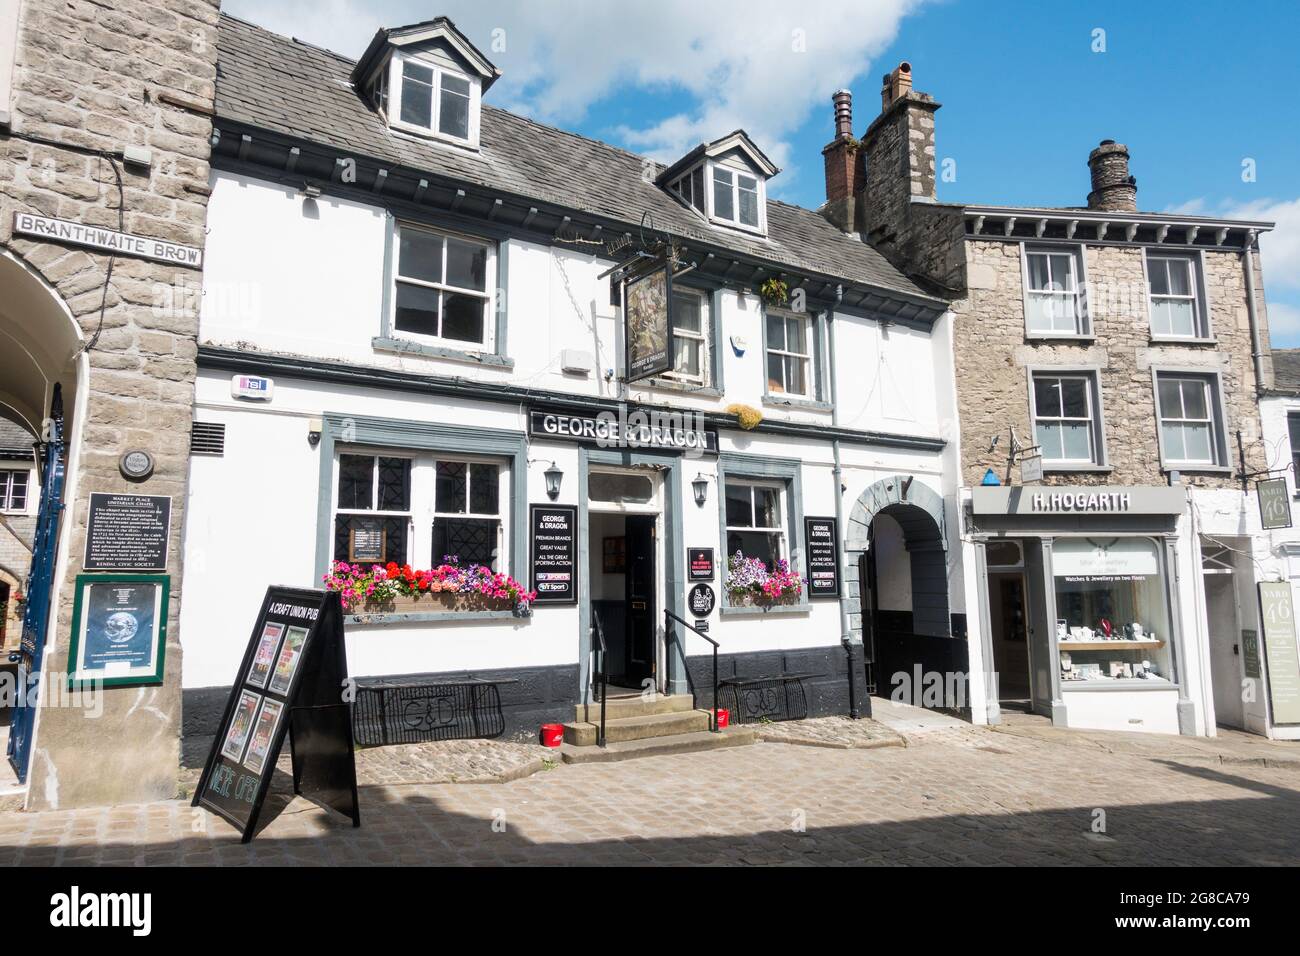 The George and Dragon pub in Kendal, Cumbria, England, UK Stock Photo